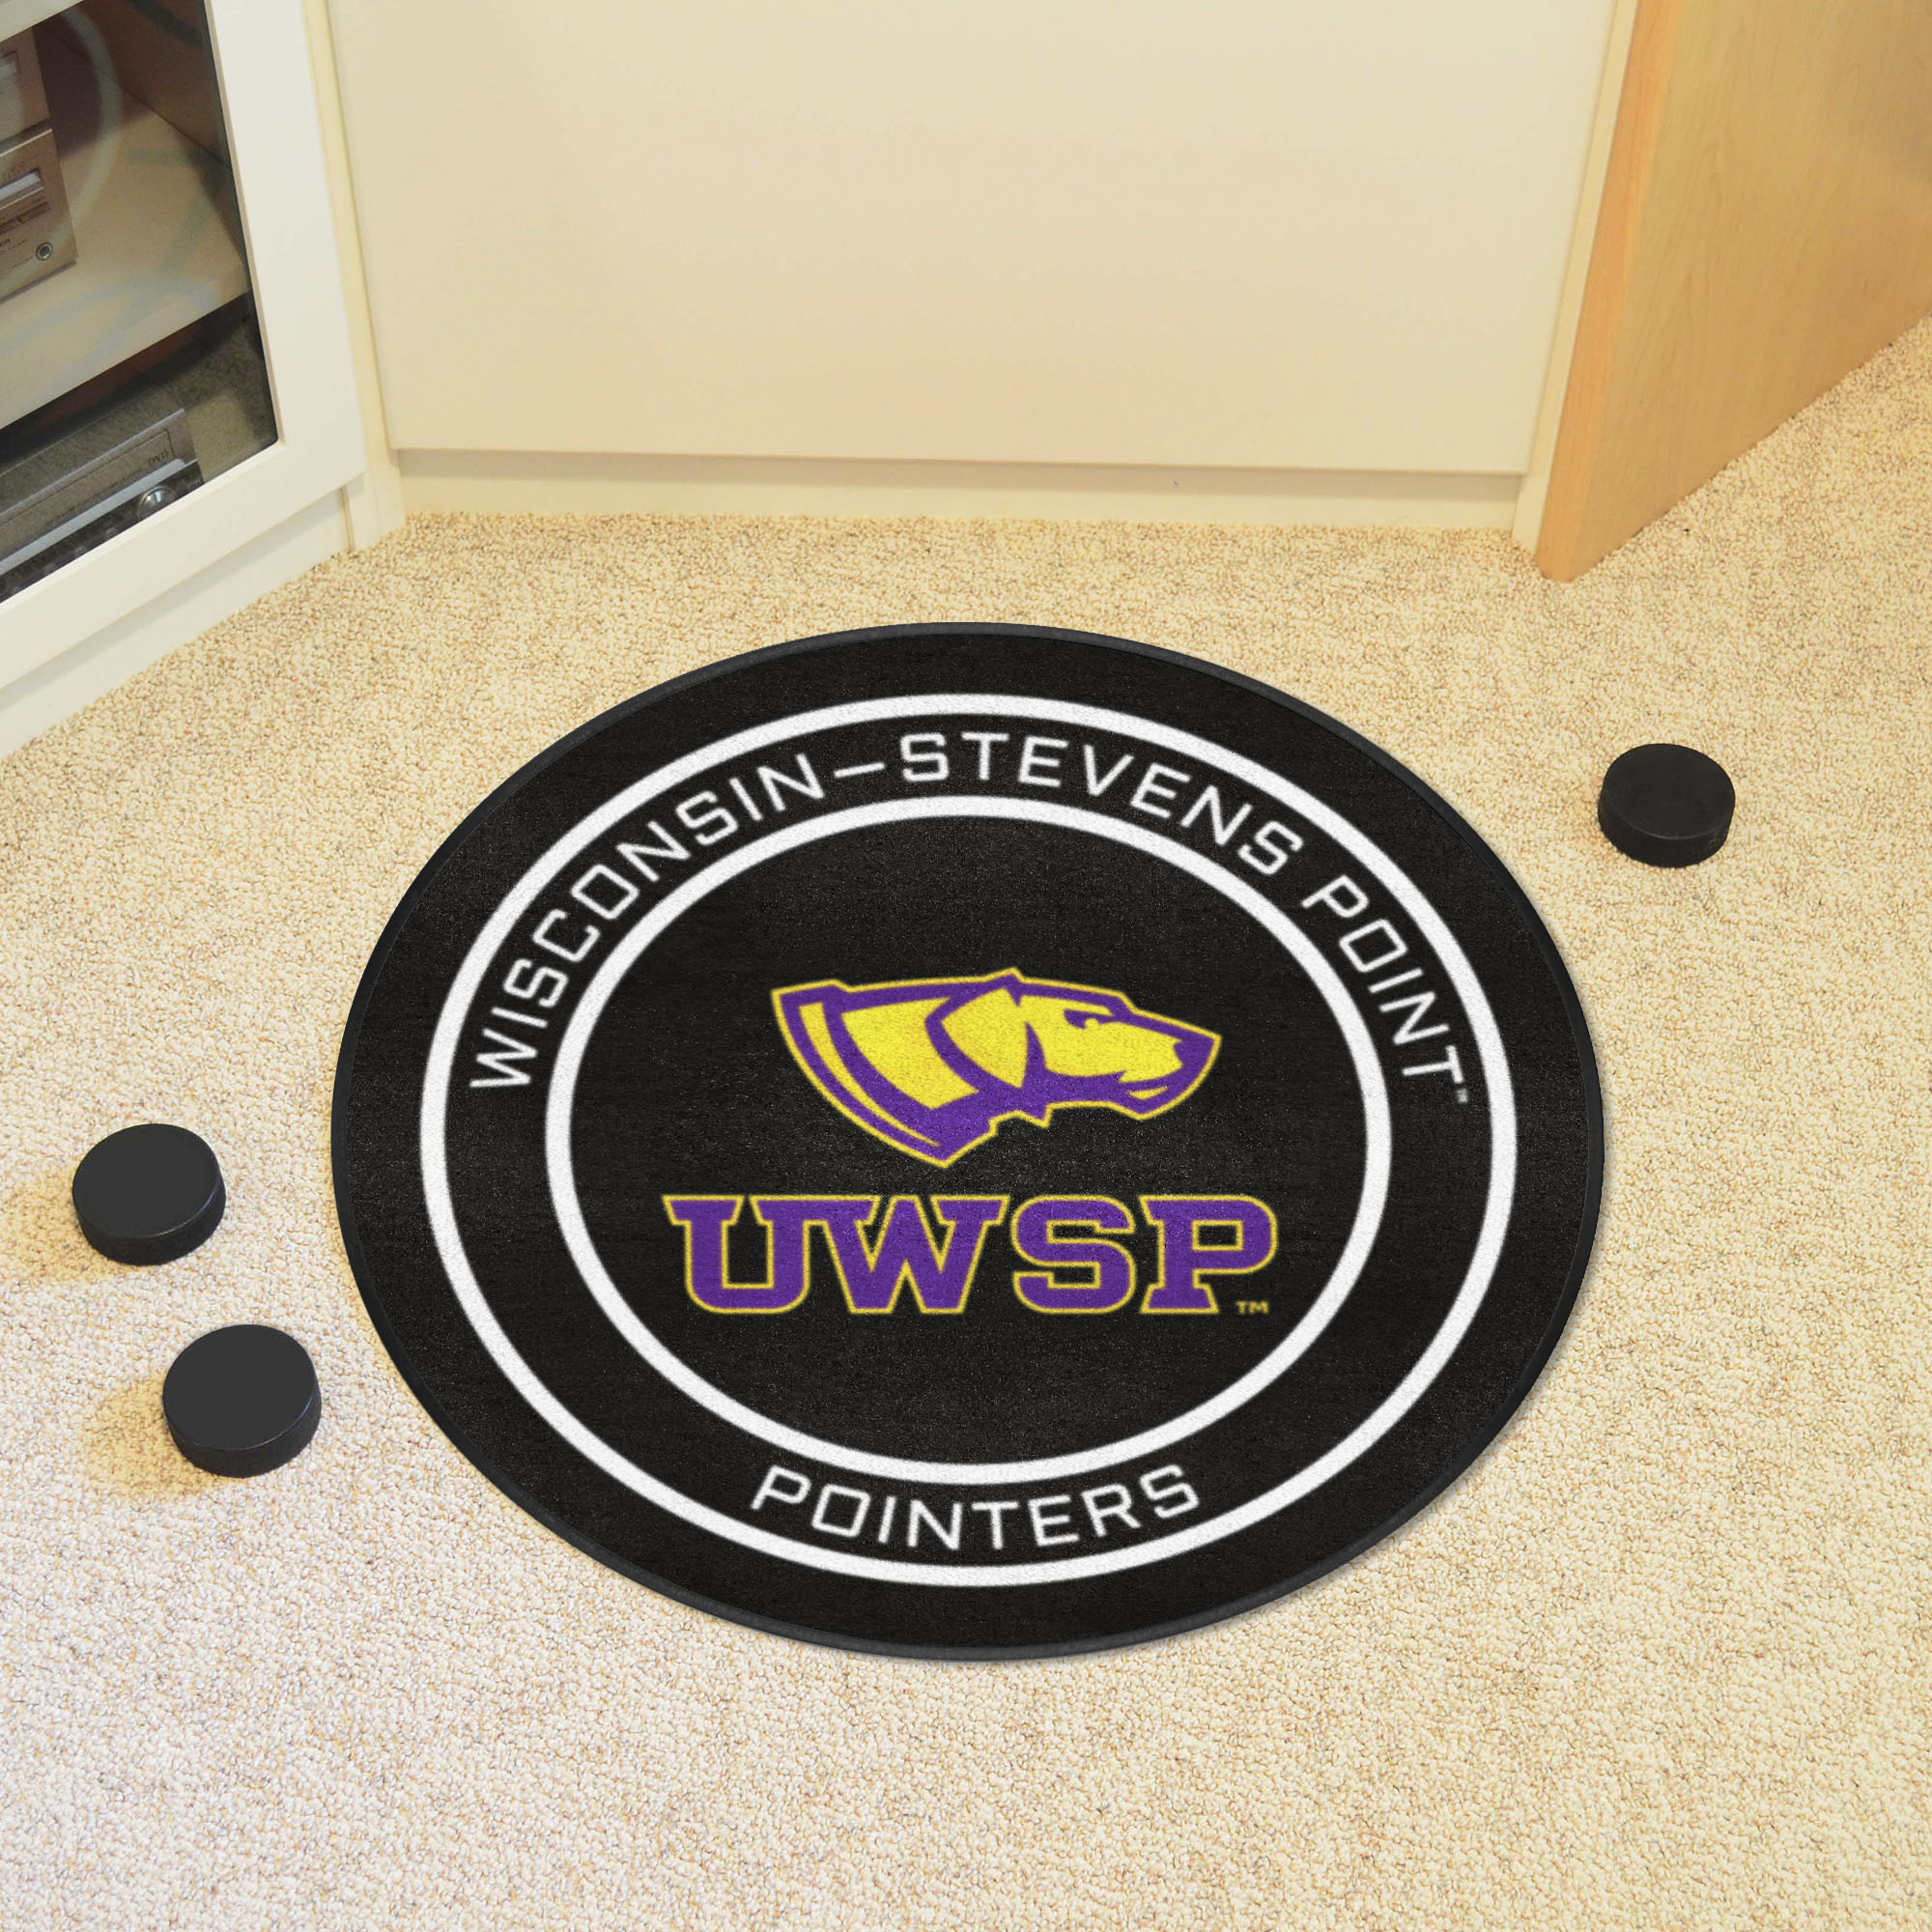 Wisconsin-Stevens Point Pointers Hockey Puck Shaped Area Rug